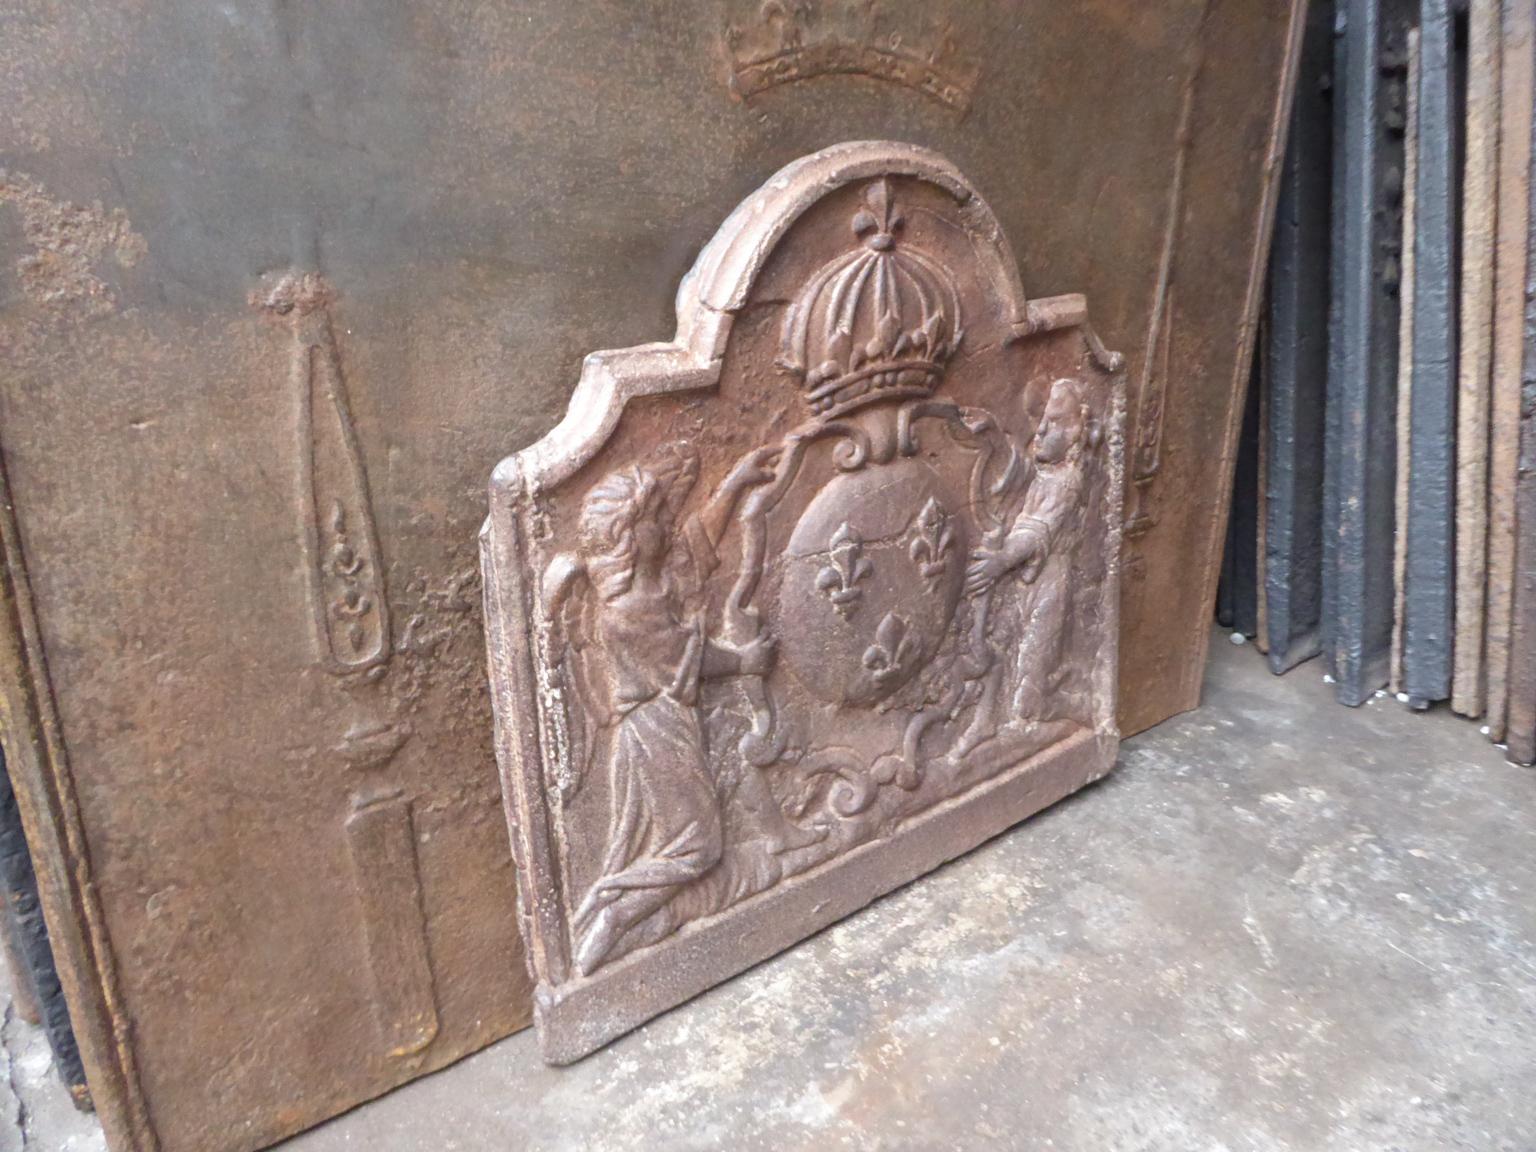 Antique French Fireback / Backsplash with Arms of France, 17th-18th Century For Sale 1